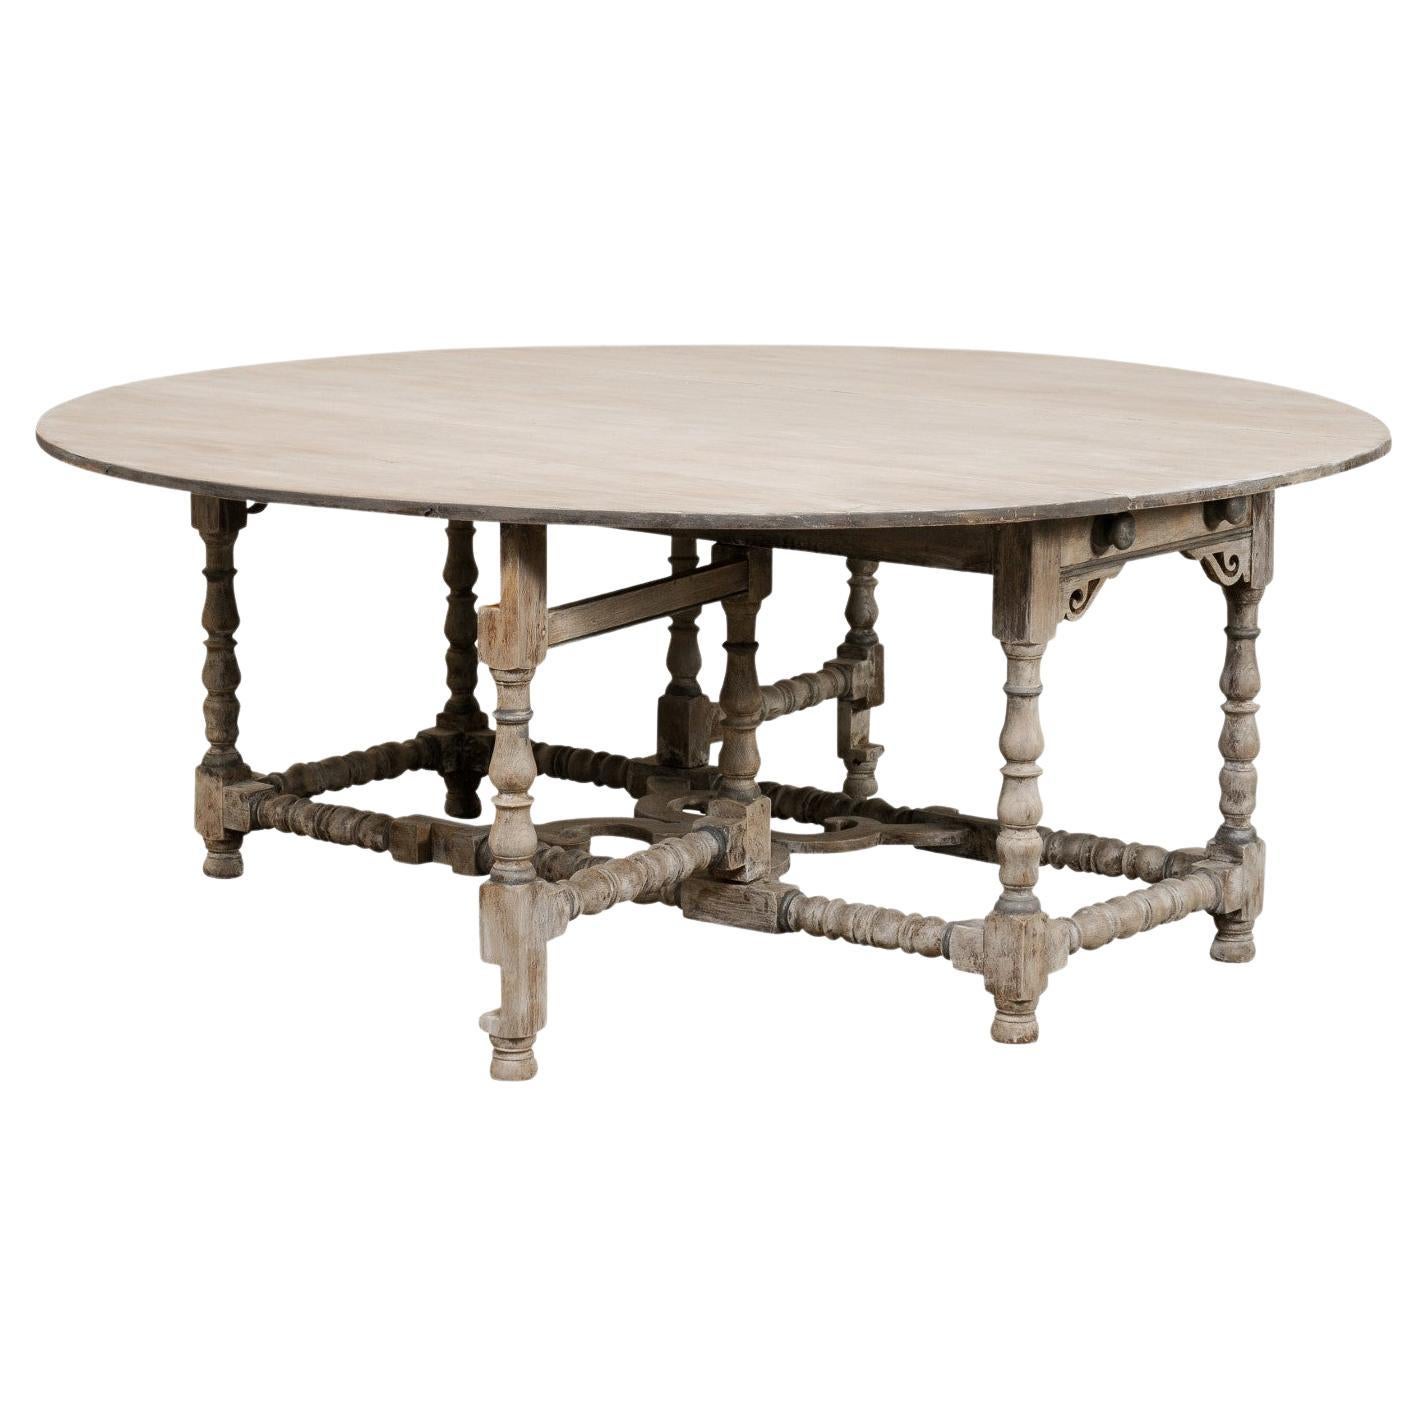 Antique Table With Six Legs At 1stdibs Antique 6 Legged Table